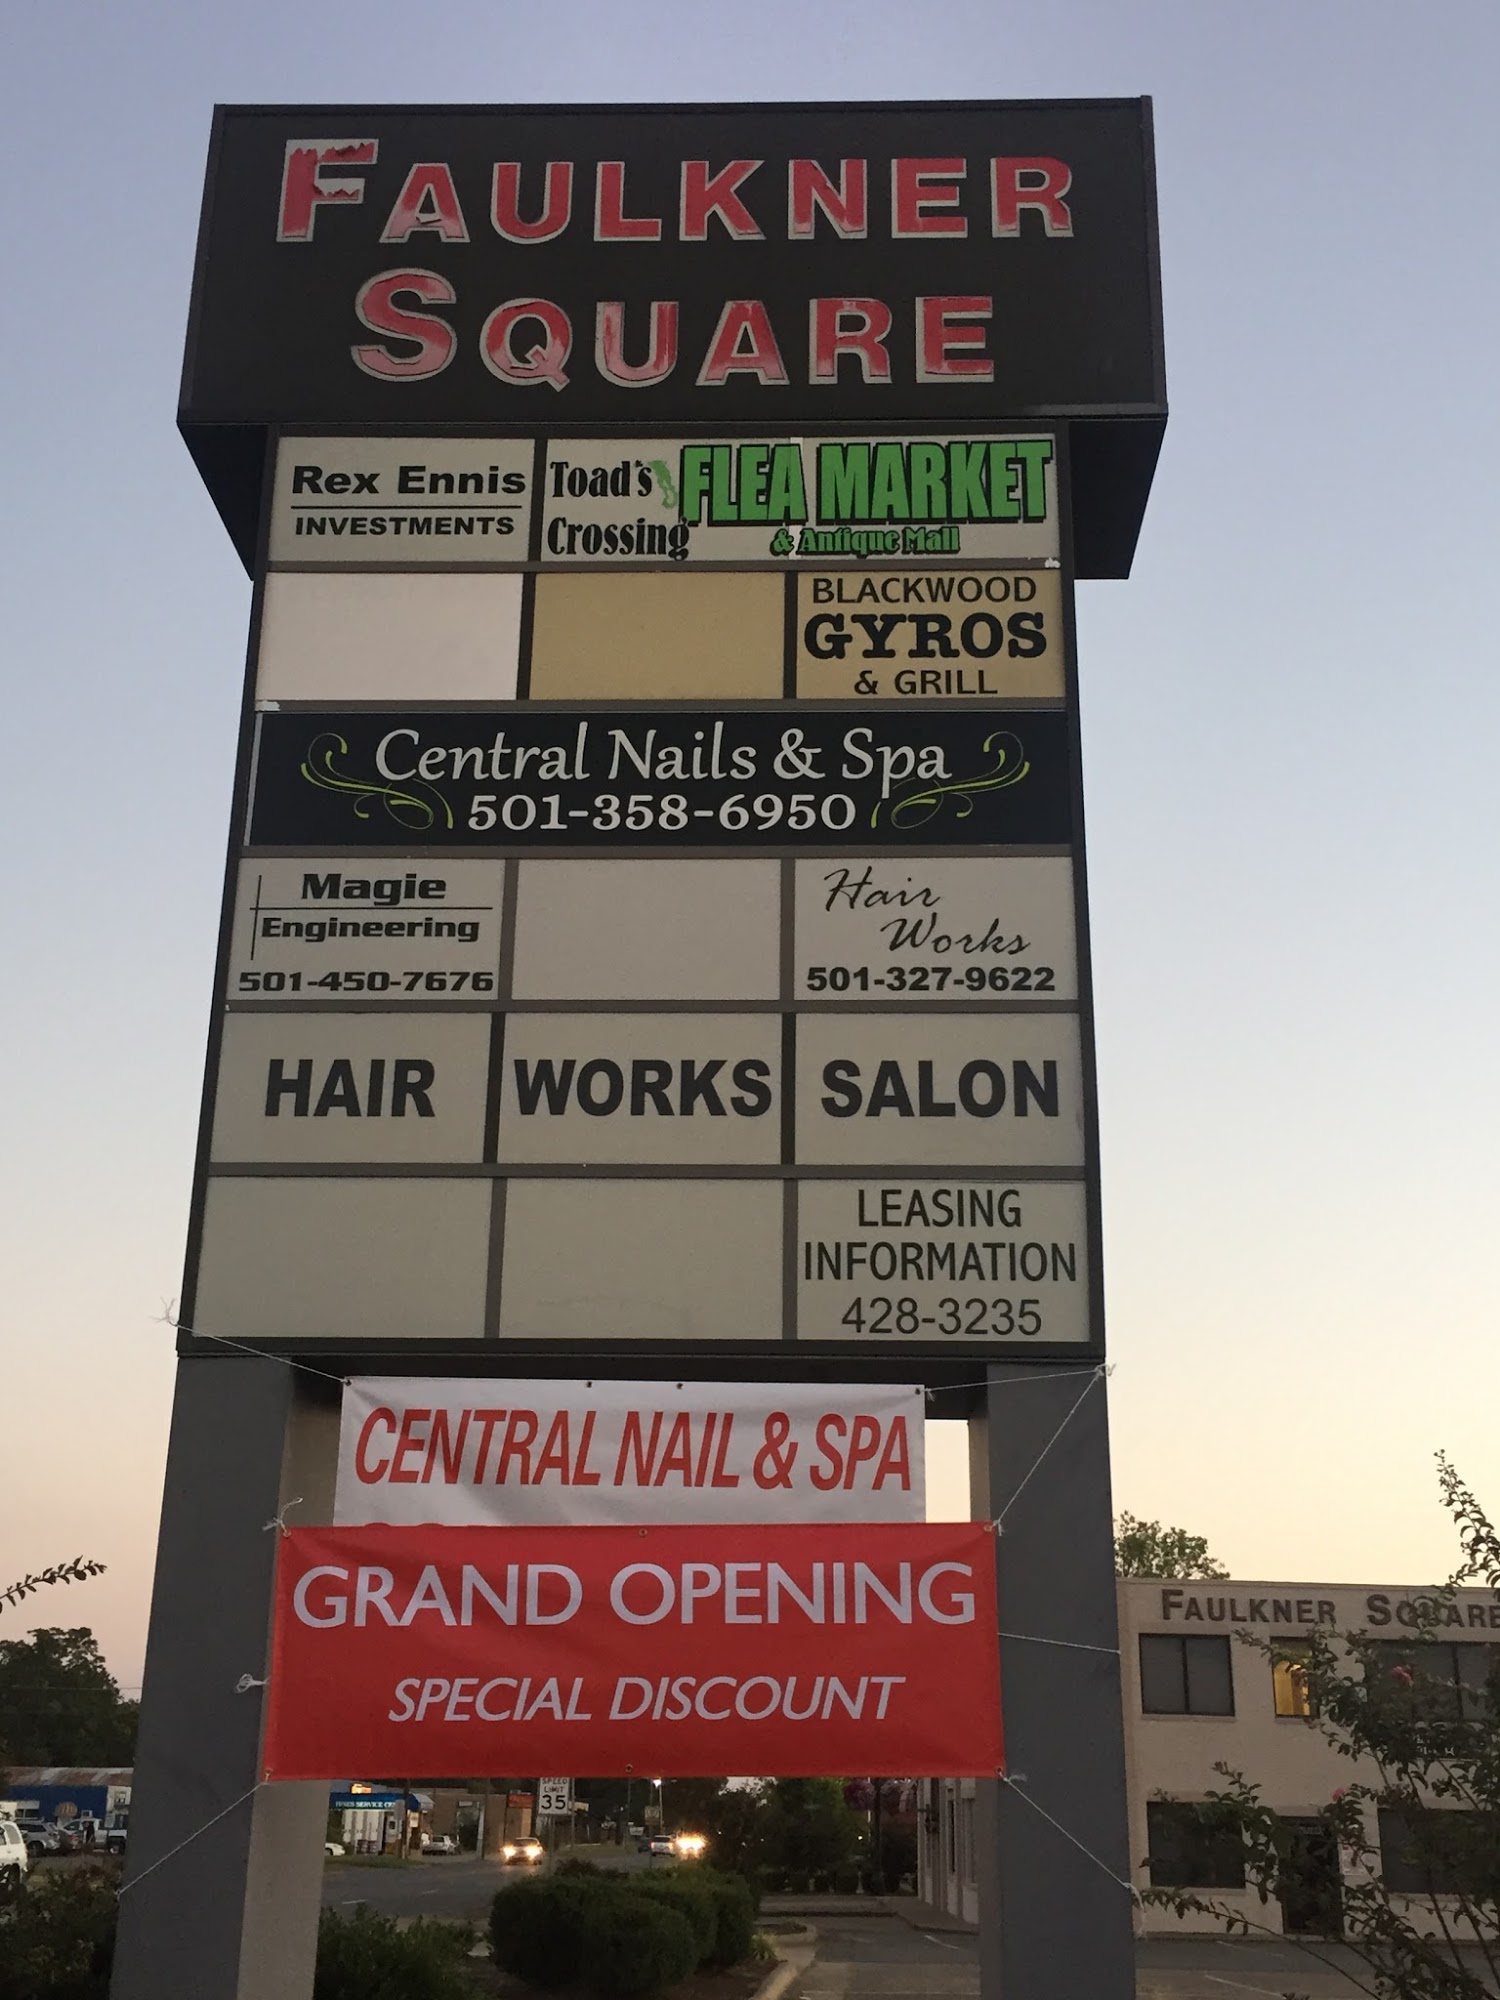 Central Nails & Spa